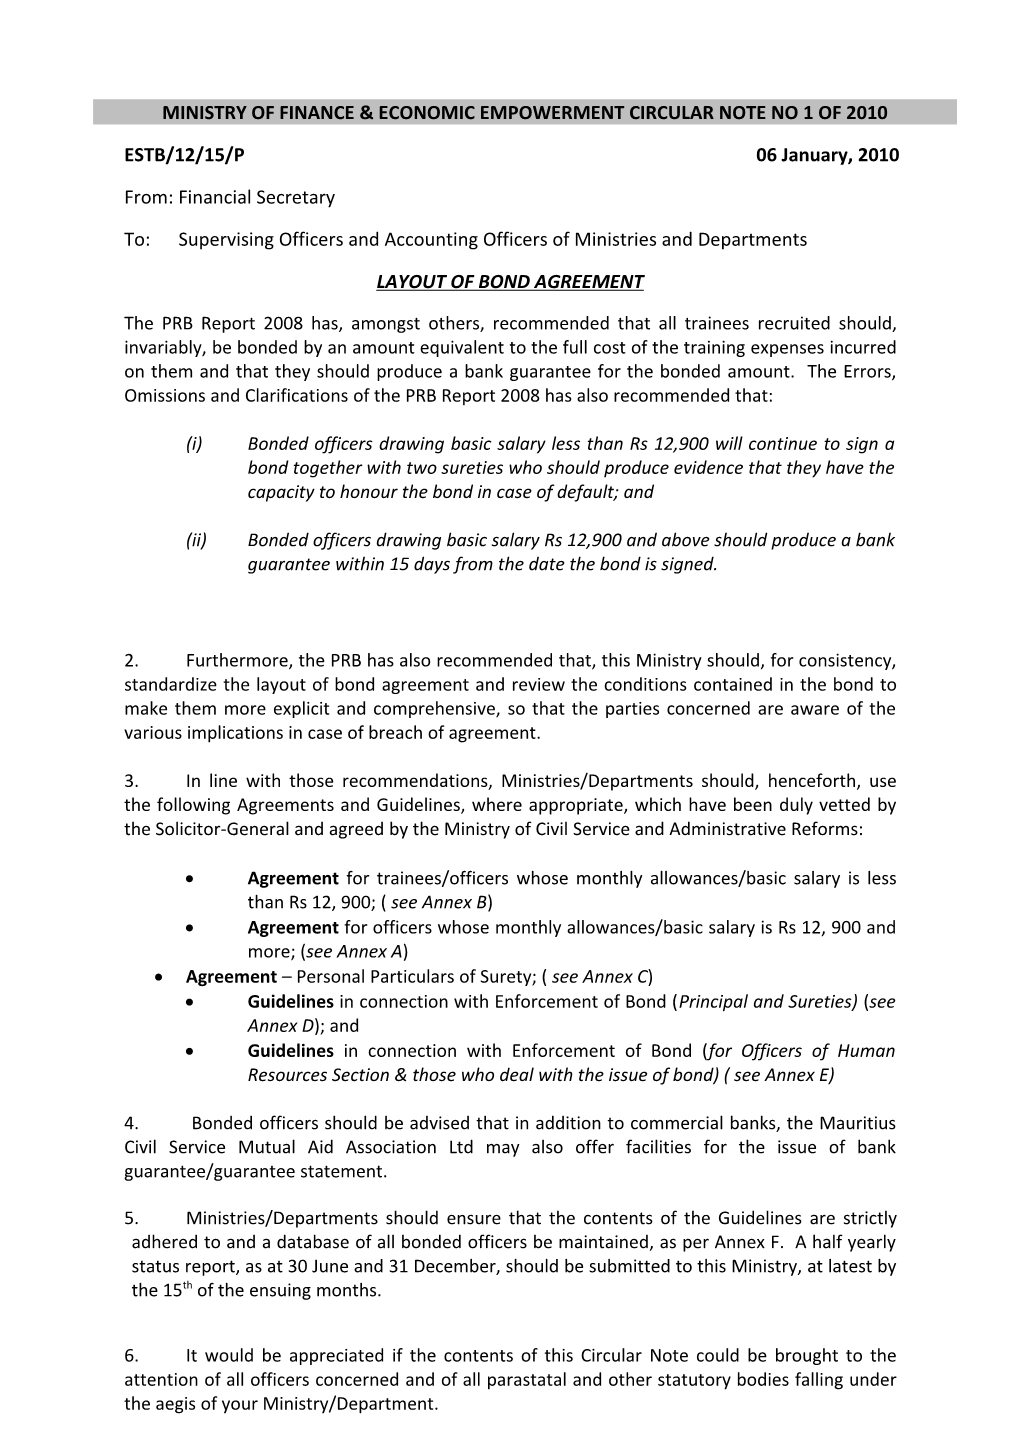 Ministry of Finance & Economic Empowerment Circular Note No 1 of 2010